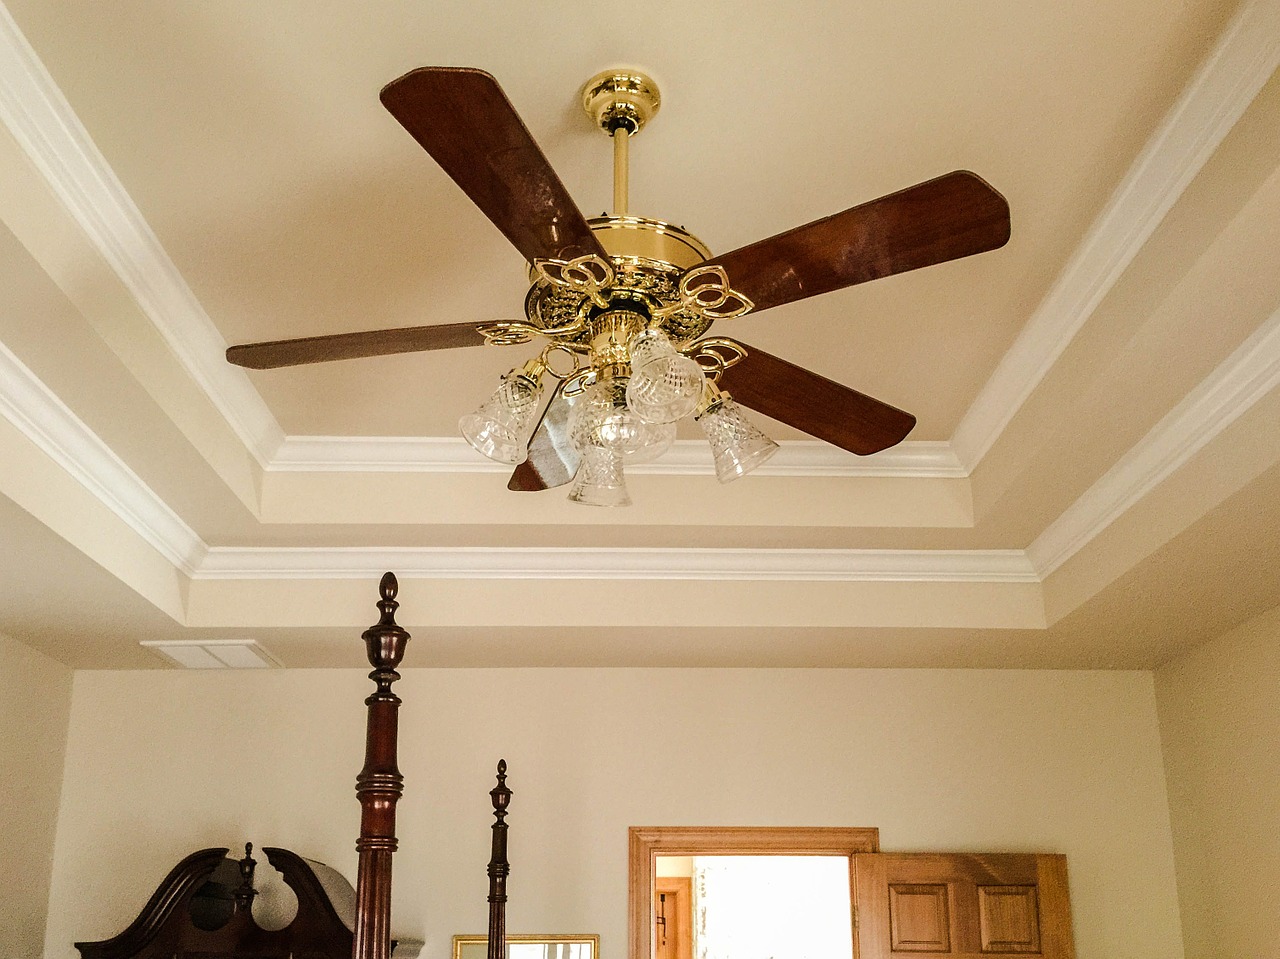 The humble Ceiling Fan may be criticized by some, but it is has many useful purposes in your home ... photo by CC user JamesDeMers on pixabay